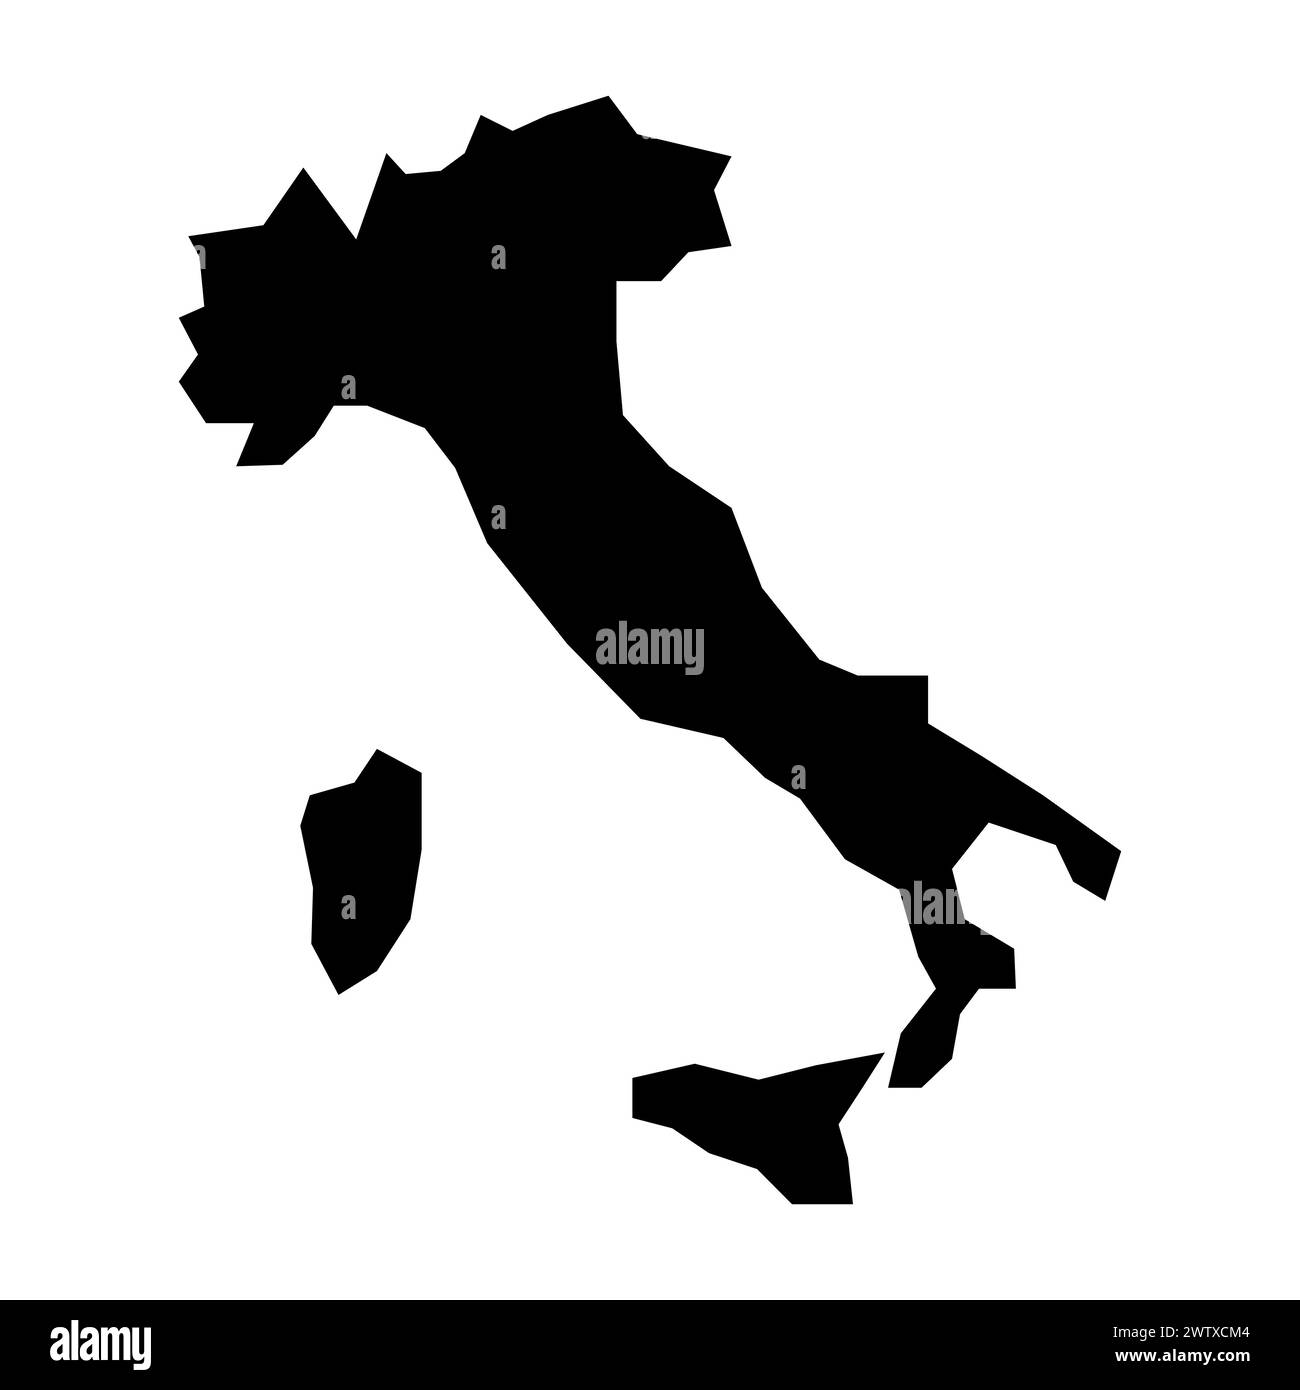 black vector italy map on white background Stock Vector